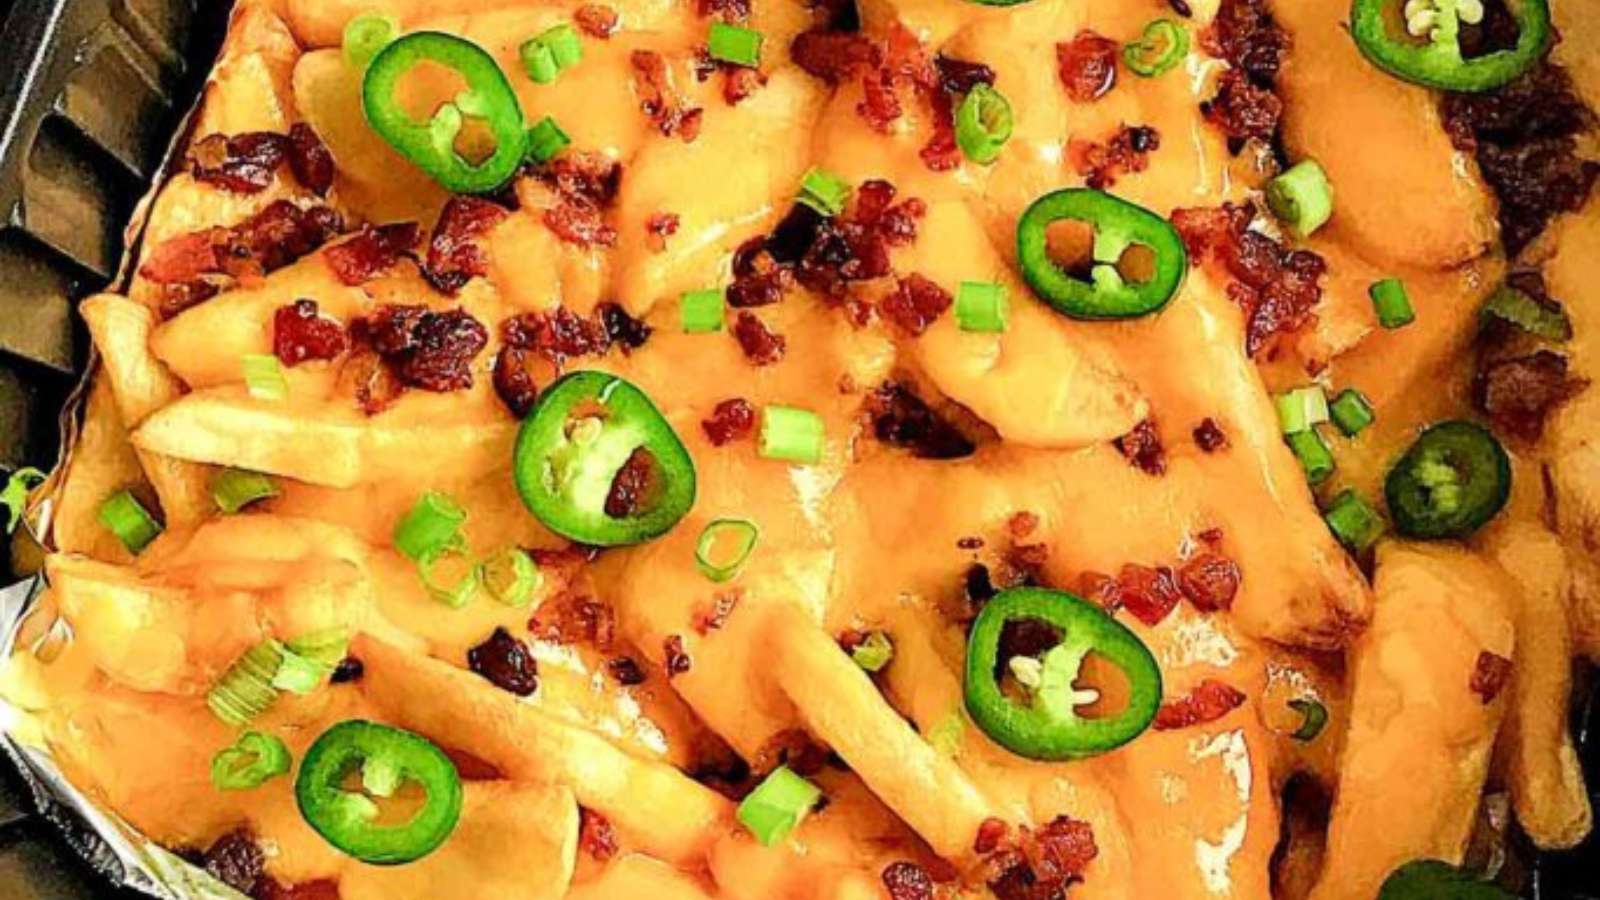 A tray of nachos with bacon and jalapenos.